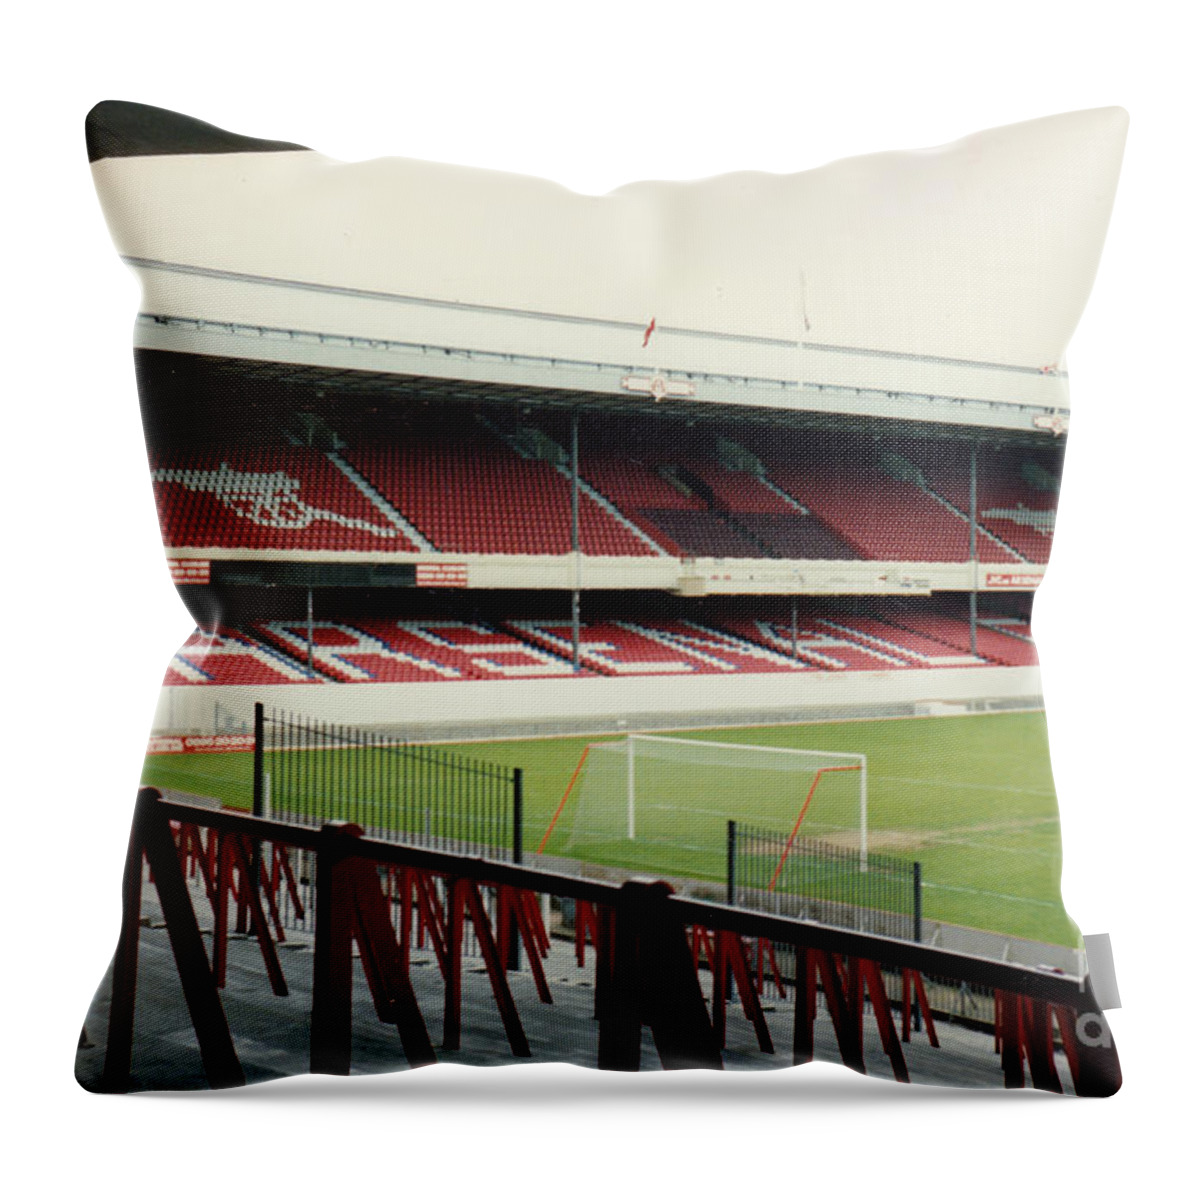 Arsenal Throw Pillow featuring the photograph Arsenal - Highbury - West Stand 3 - 1992 by Legendary Football Grounds